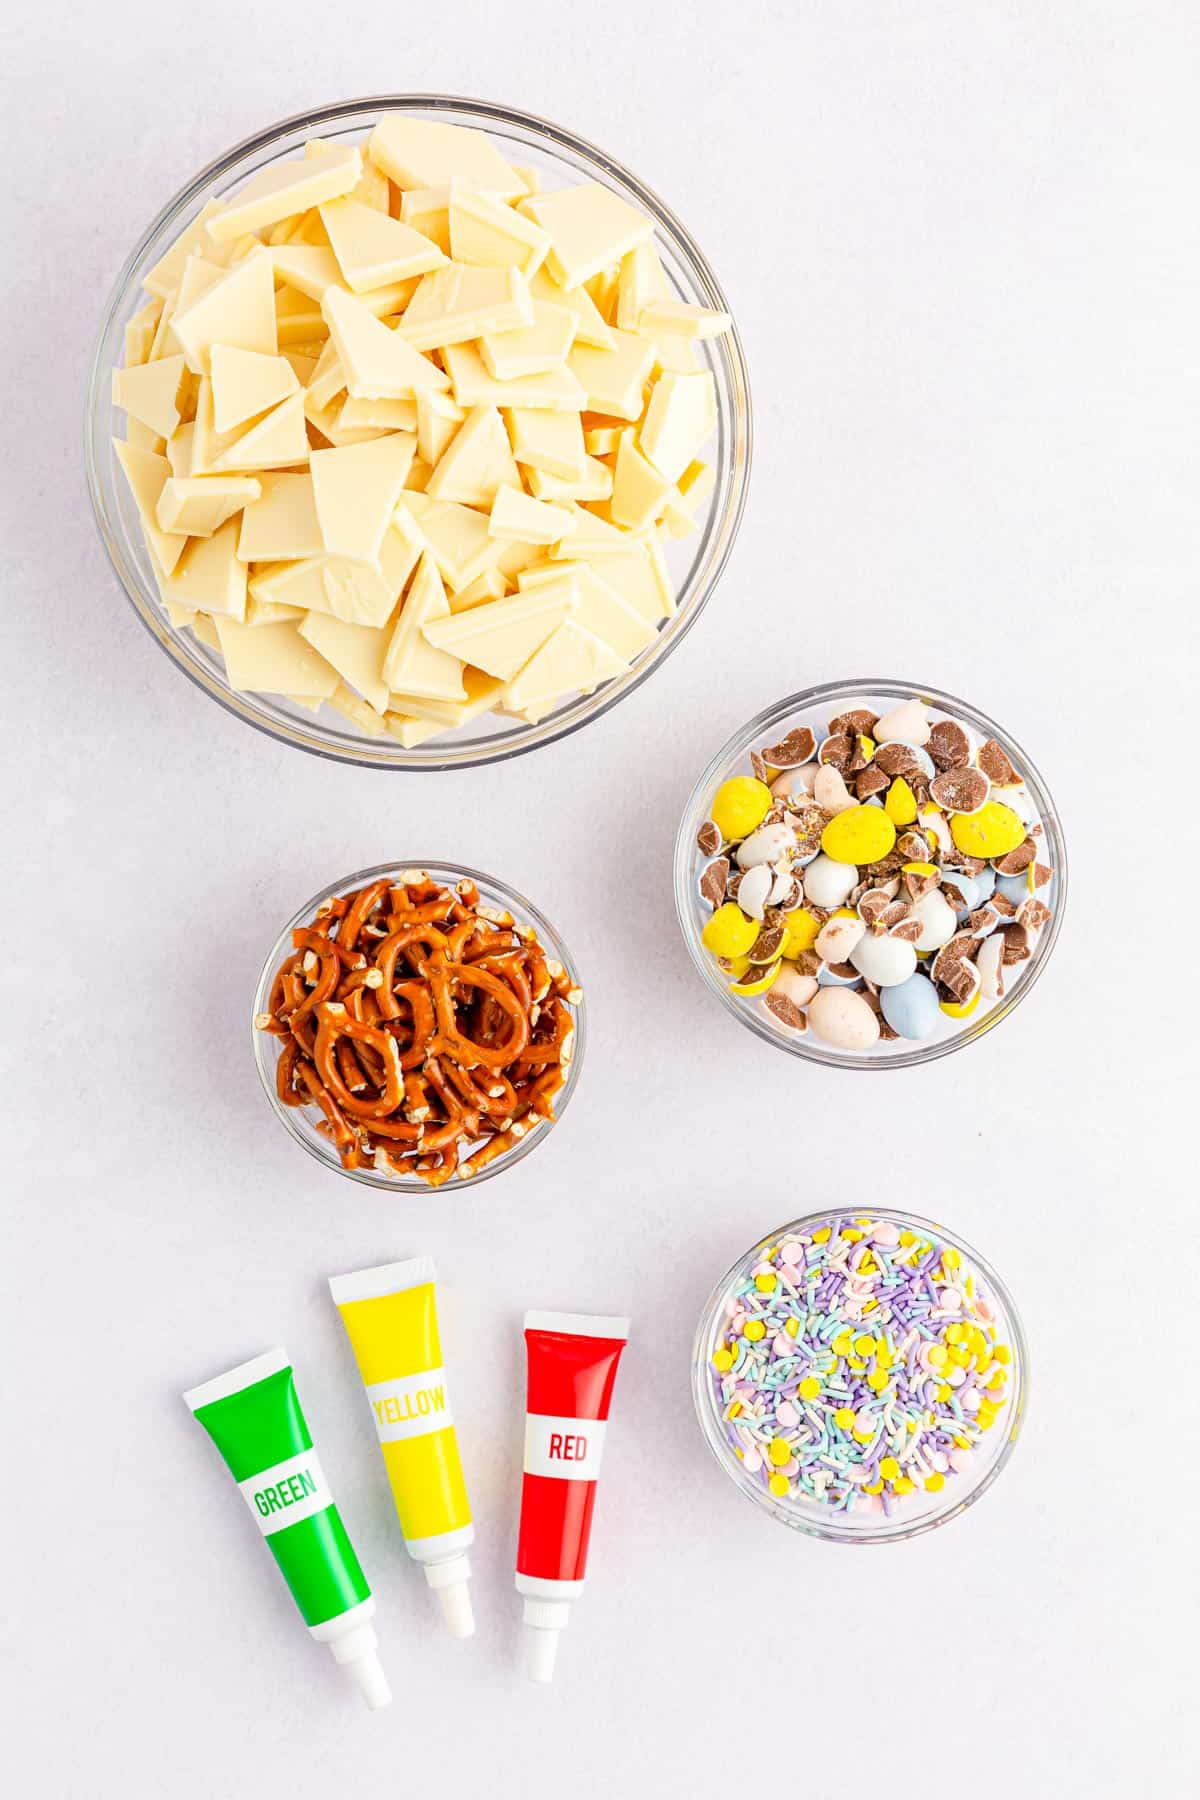 Ingredients needed to make Easter bark with Cadbury mini eggs and pretzels.